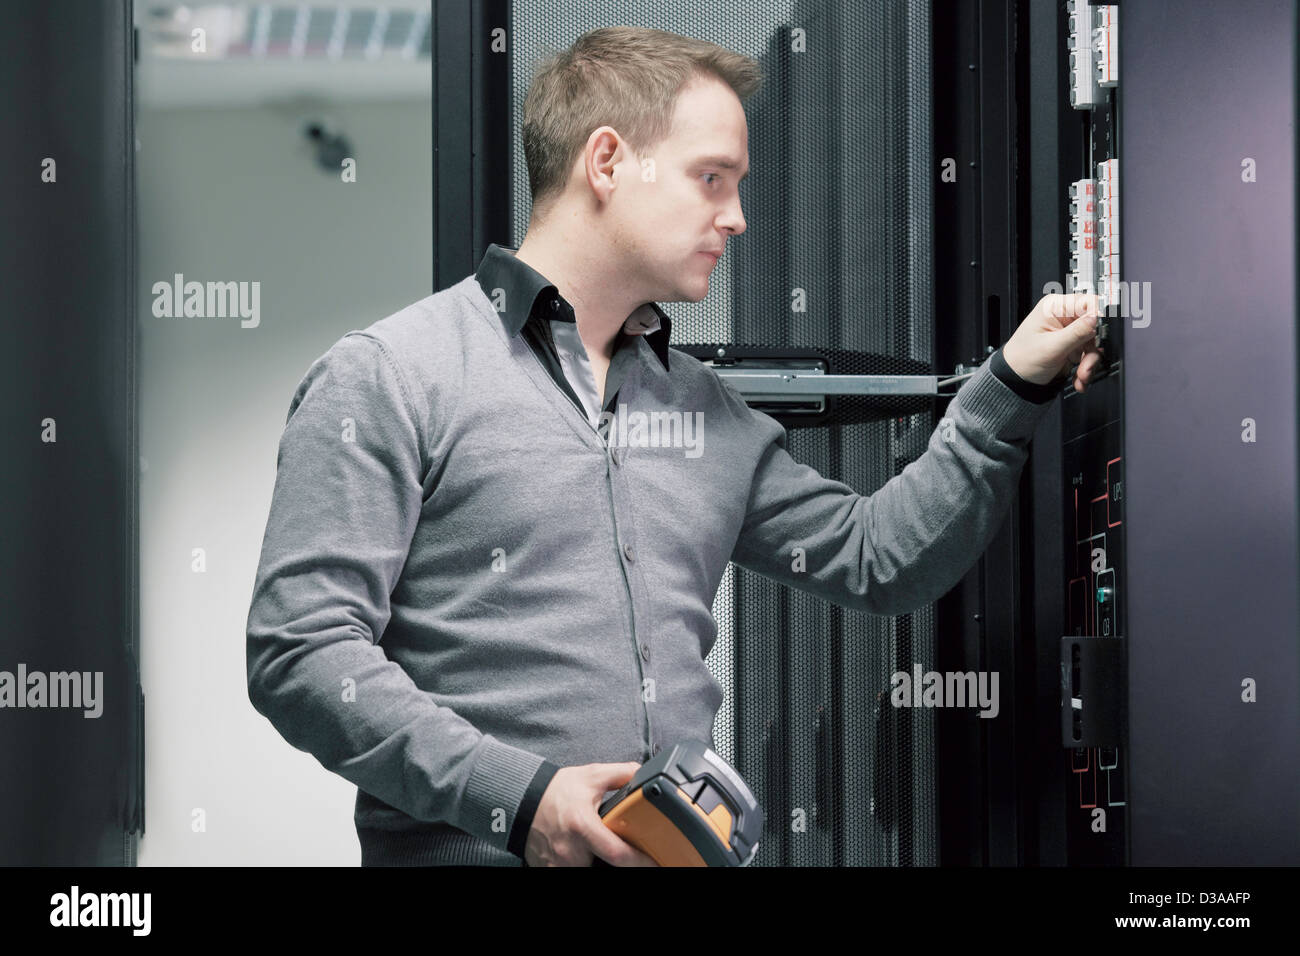 Man working in server room Stock Photo